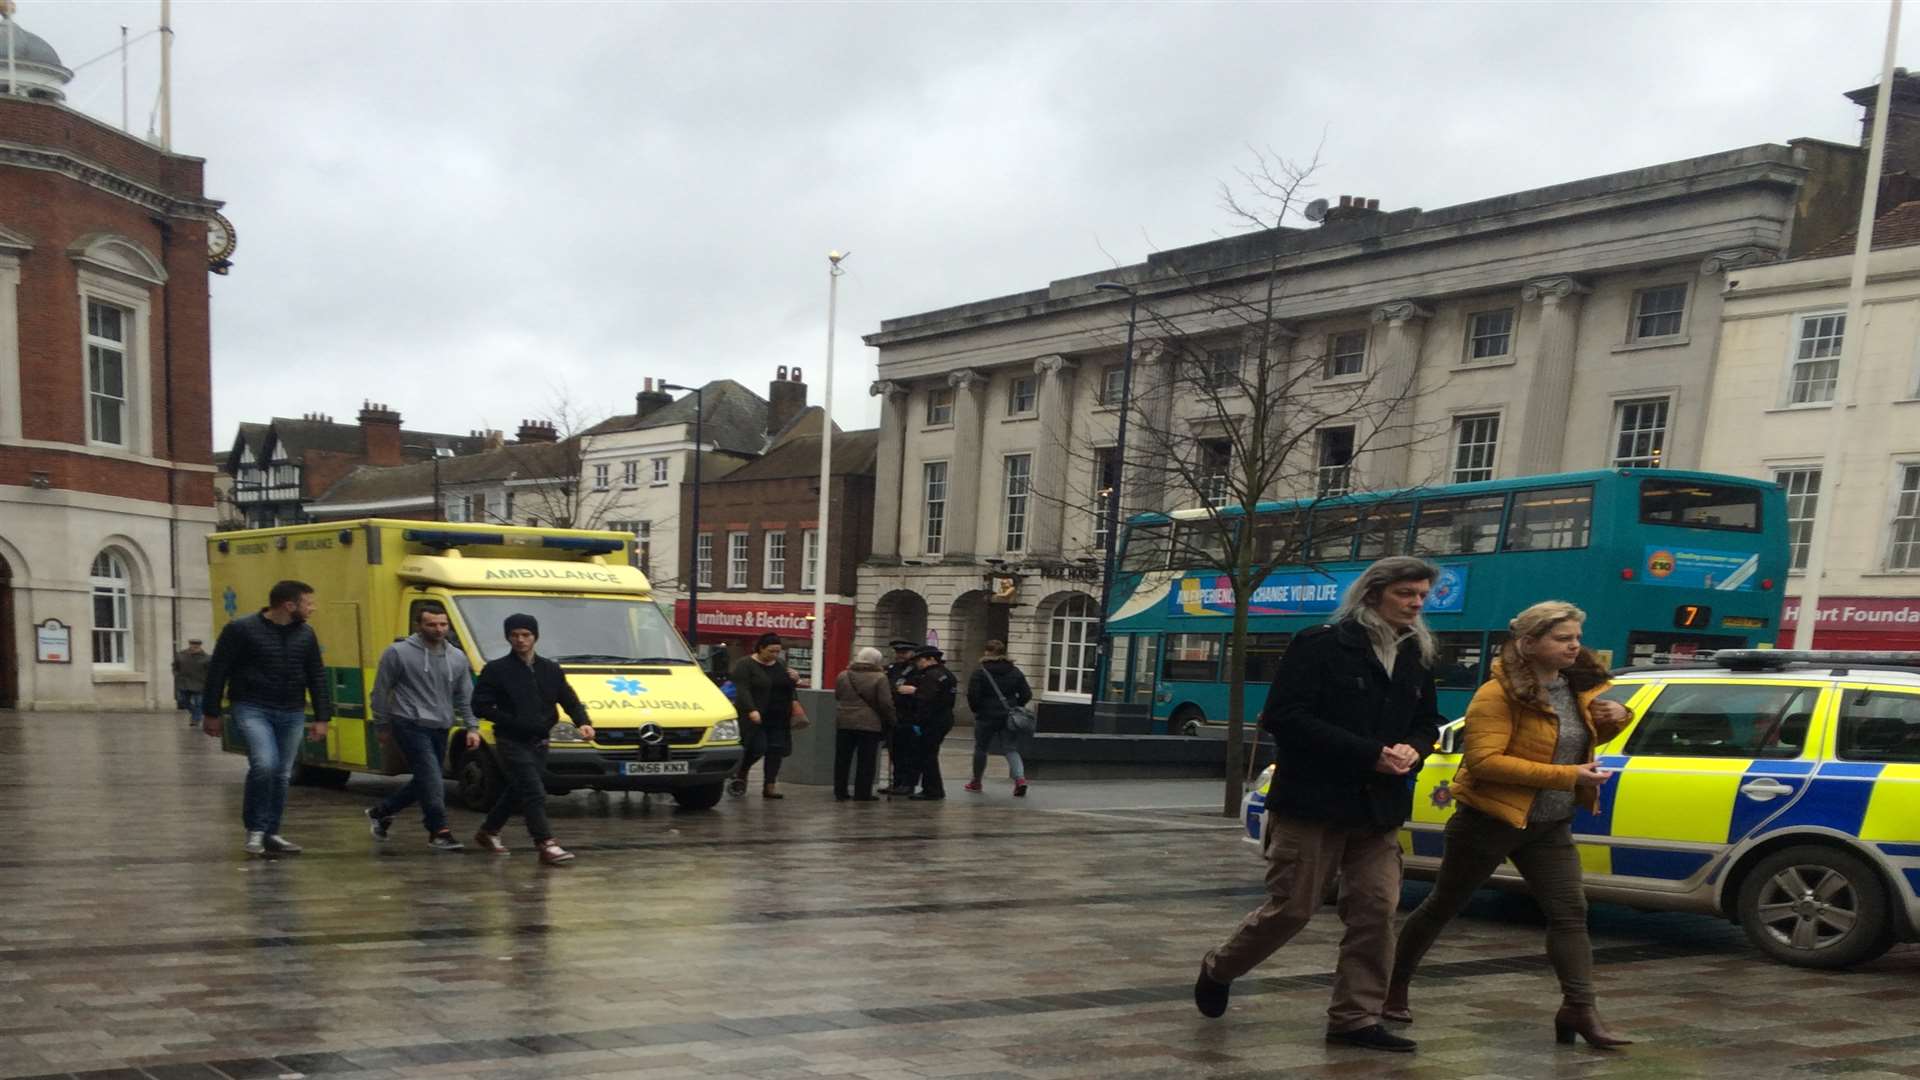 Emergency services were called to Jubilee Square